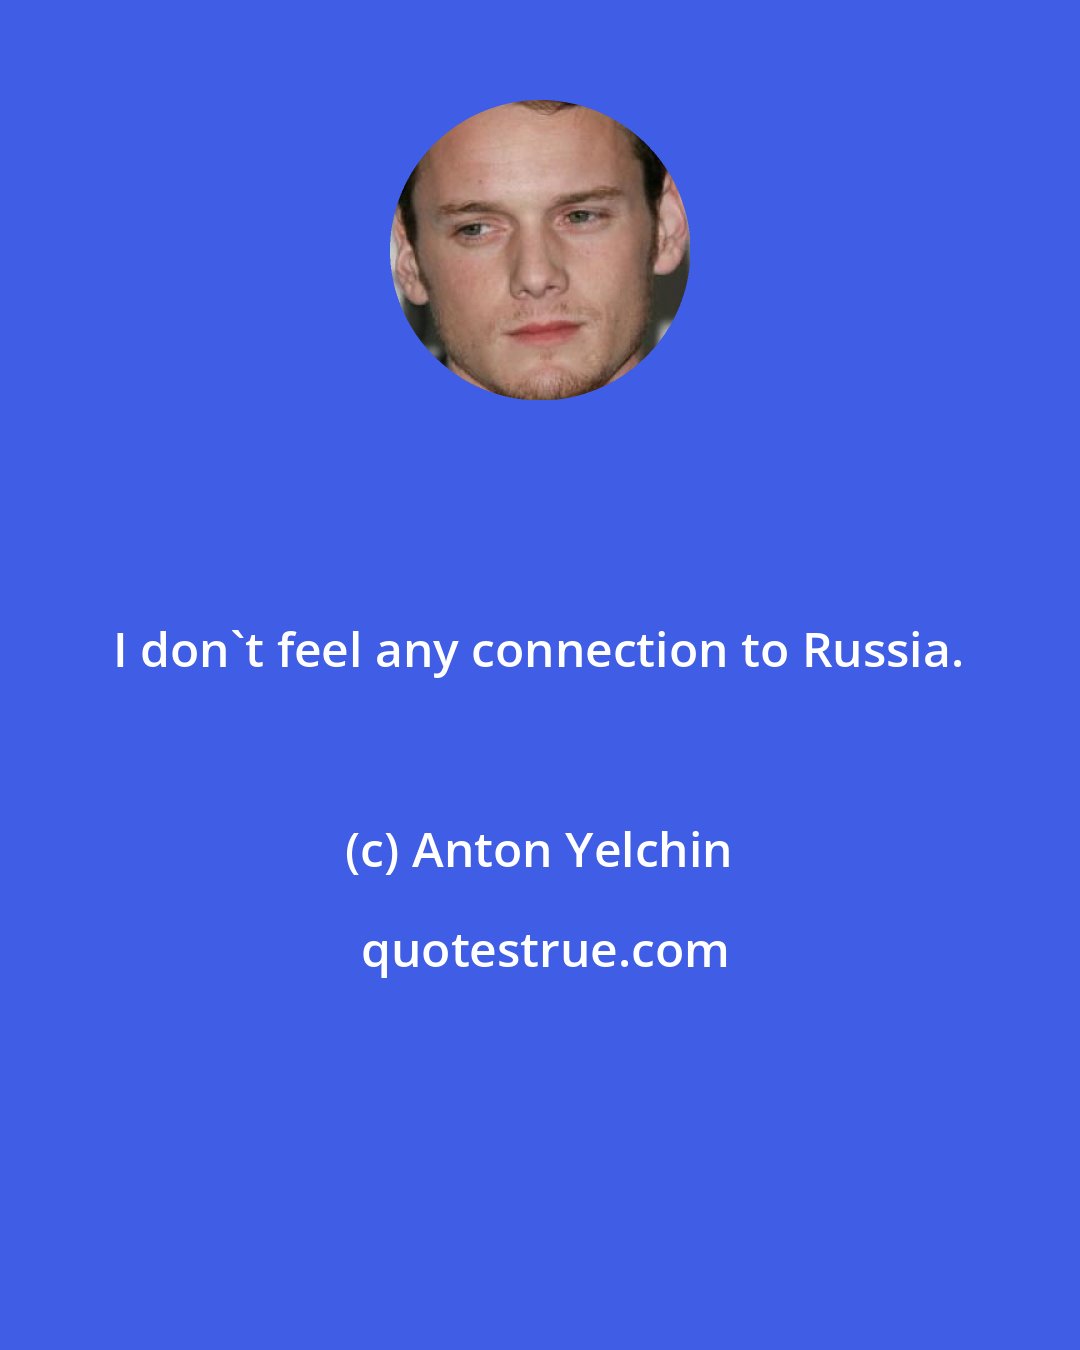 Anton Yelchin: I don't feel any connection to Russia.